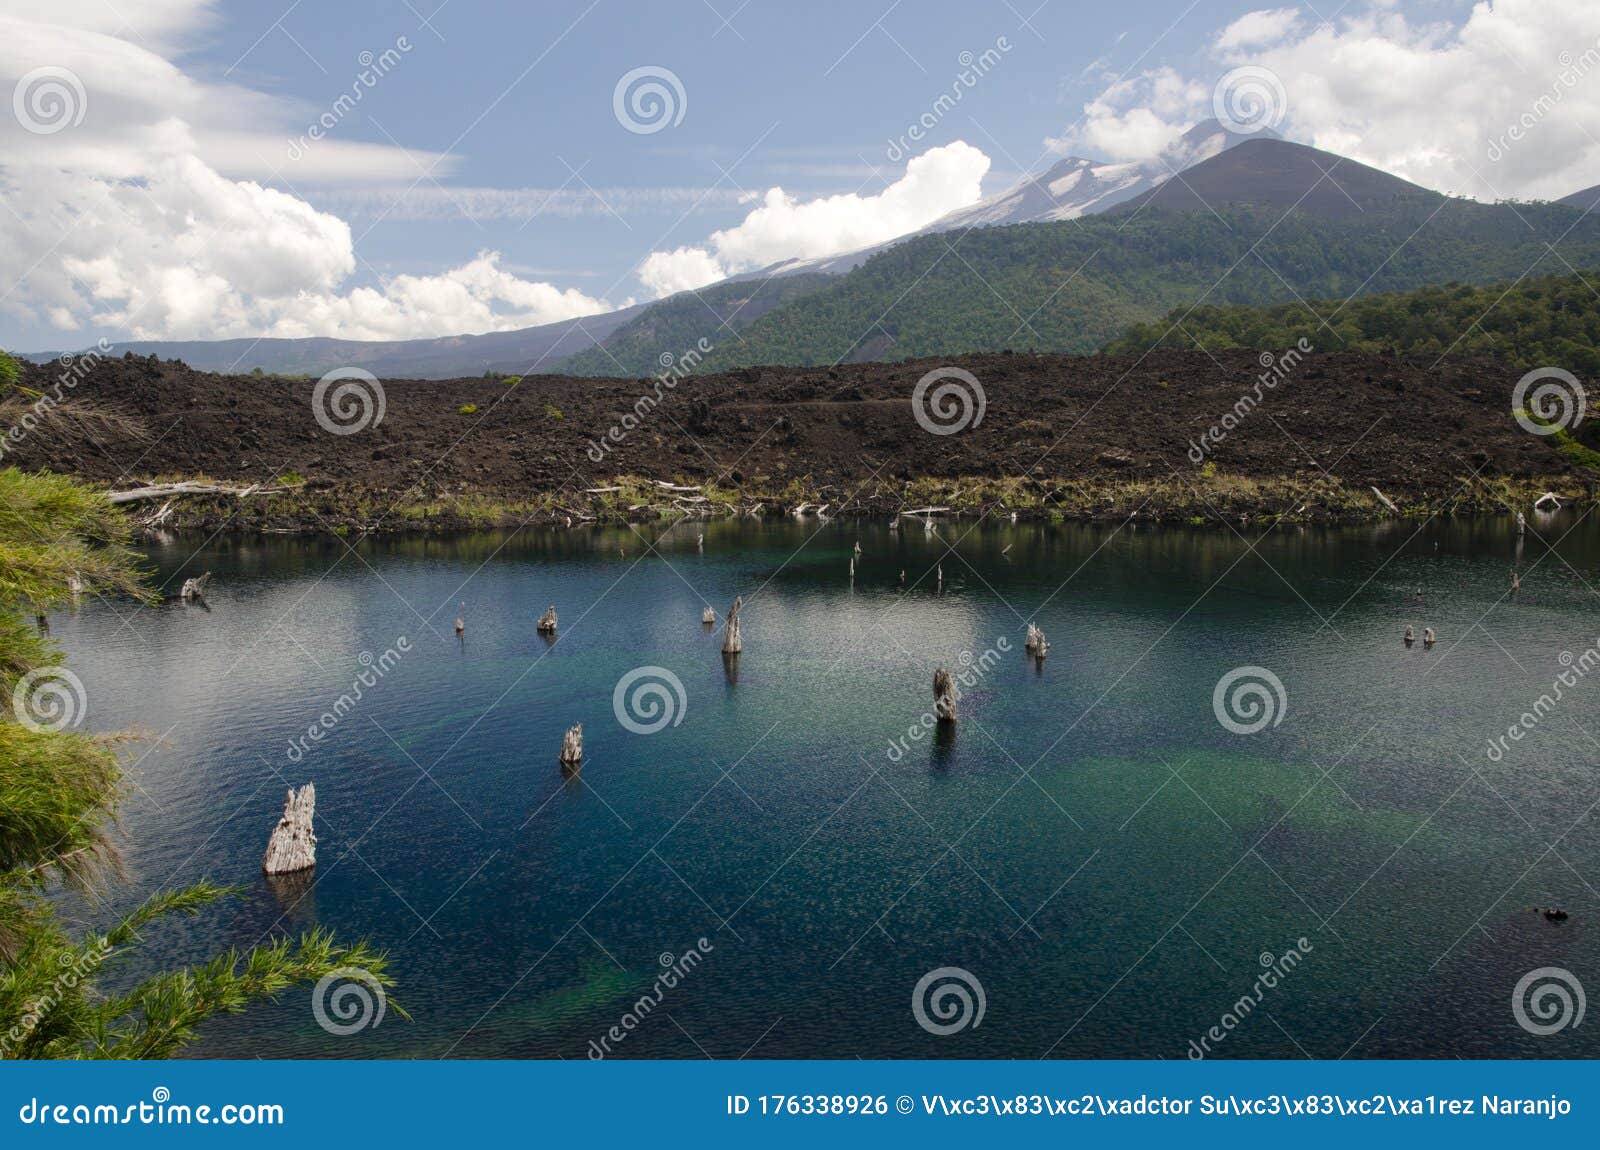 arco iris lagoon and llaima volcano covered by clouds.